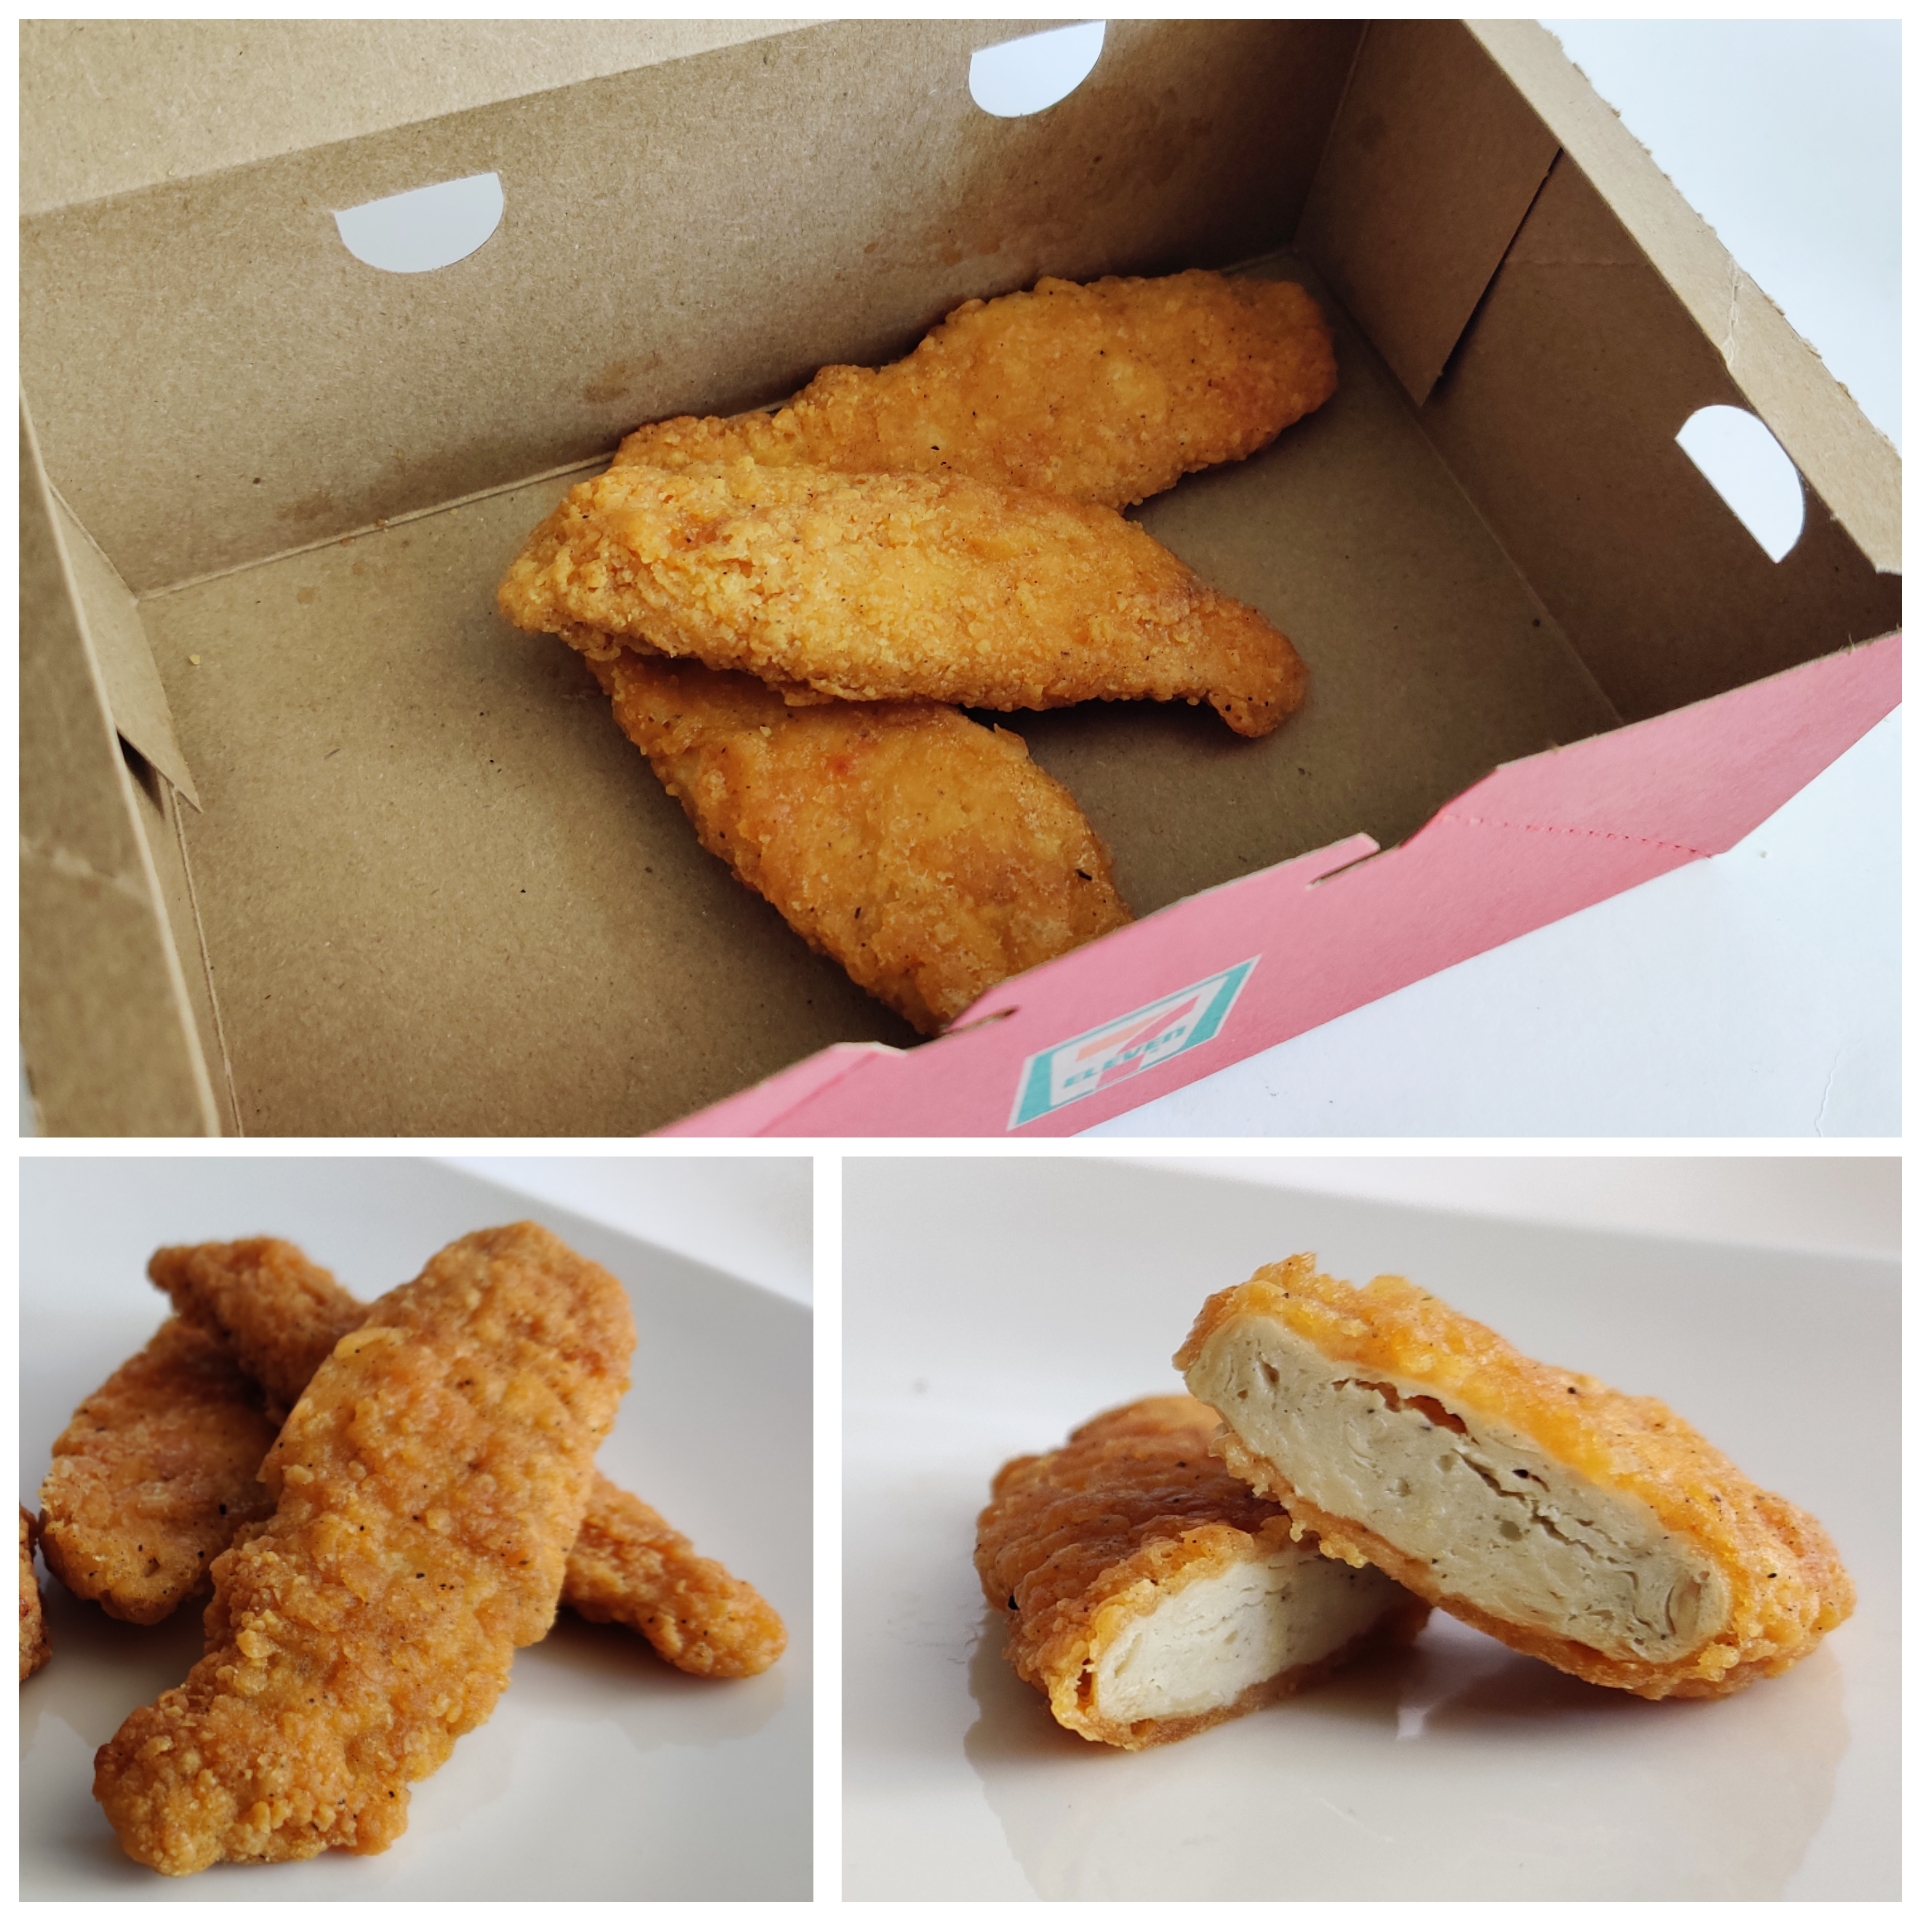 Three photos side-by-side of plant-based chicken tenders from 7 Eleven.